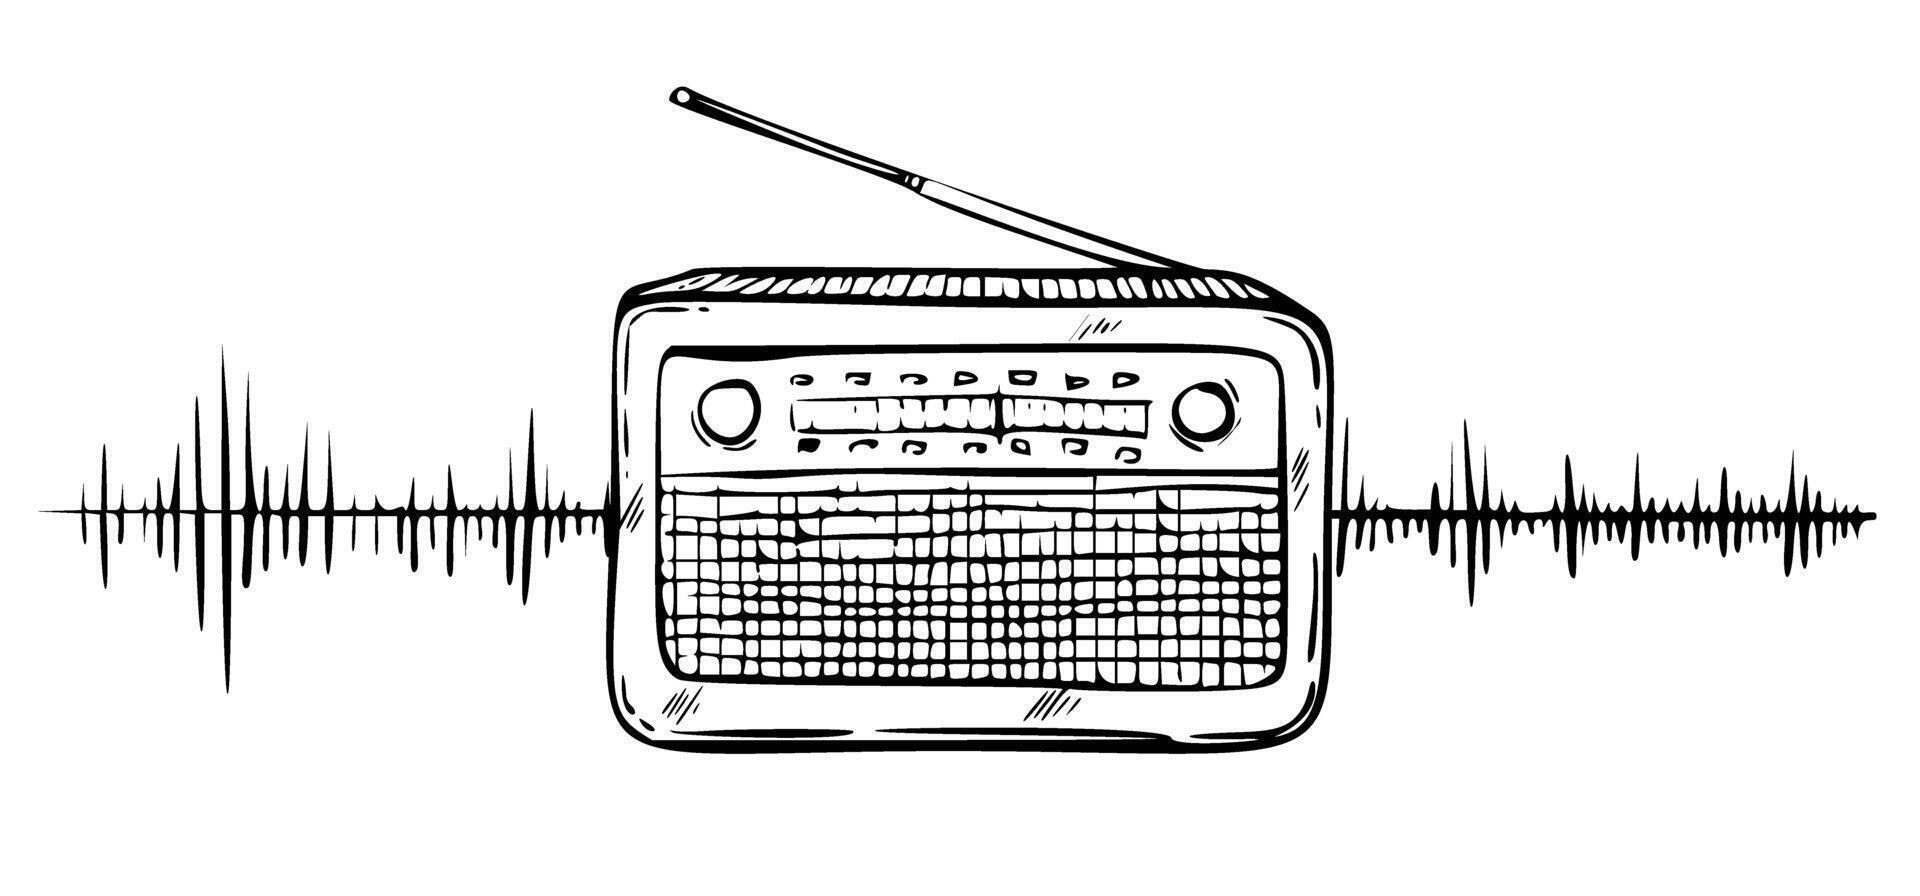 Radio vector illustration. Hand drawn linear drawing of FM tuner with sound wave painted by black inks. Sketch of old retro media equipment in outline style. Engraving of sound receiver for broadcast